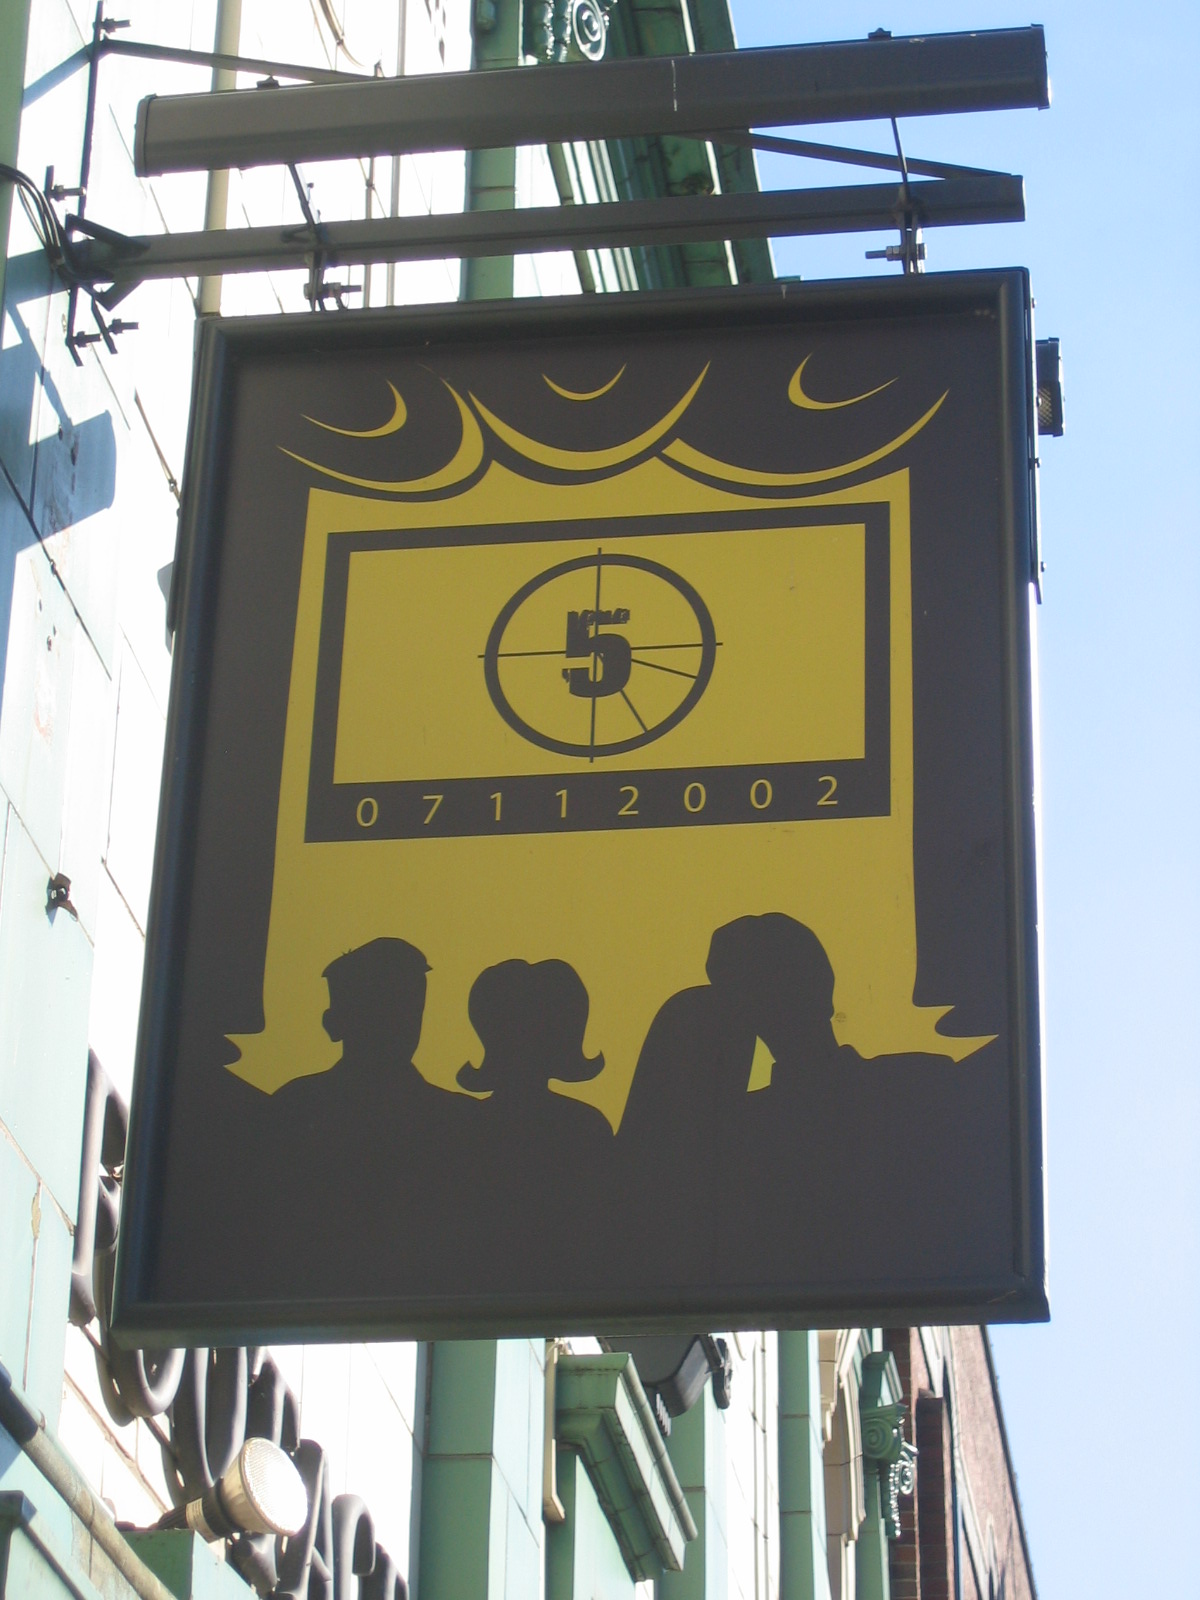 Photo taken by me – The Footage pub sign – Manchester